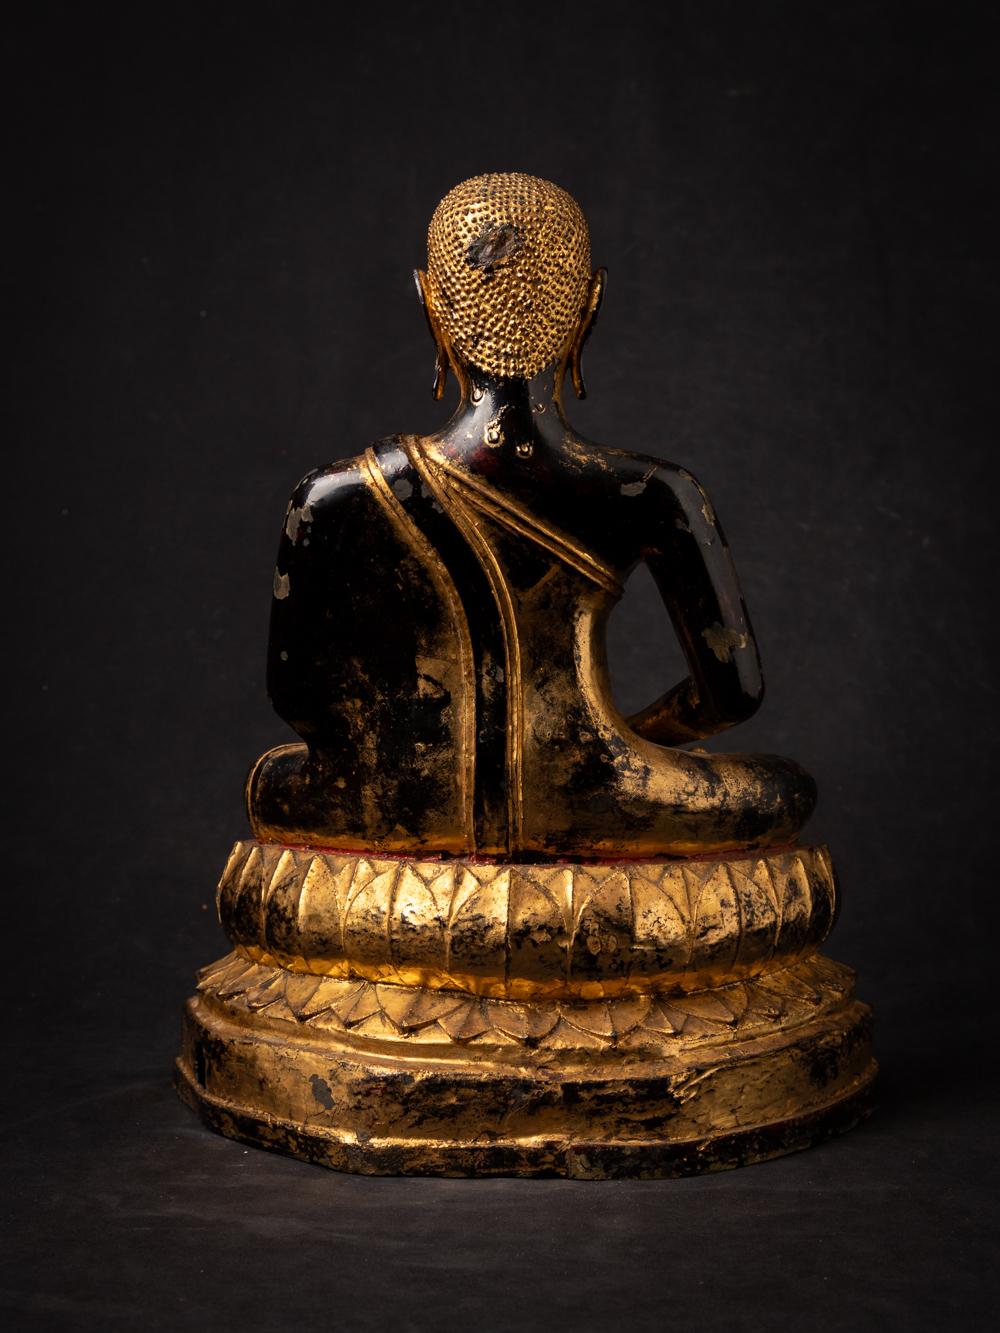 A Beautiful Antique bronze Thai Monk statue
Material : bronze
37,5 cm high
30 cm wide and 17,3 cm deep
Gilded with 24 krt. gold
Dhyana mudra
19th century
Weight: 10,2 kgs
Originating from Thailand
Nr: 3819